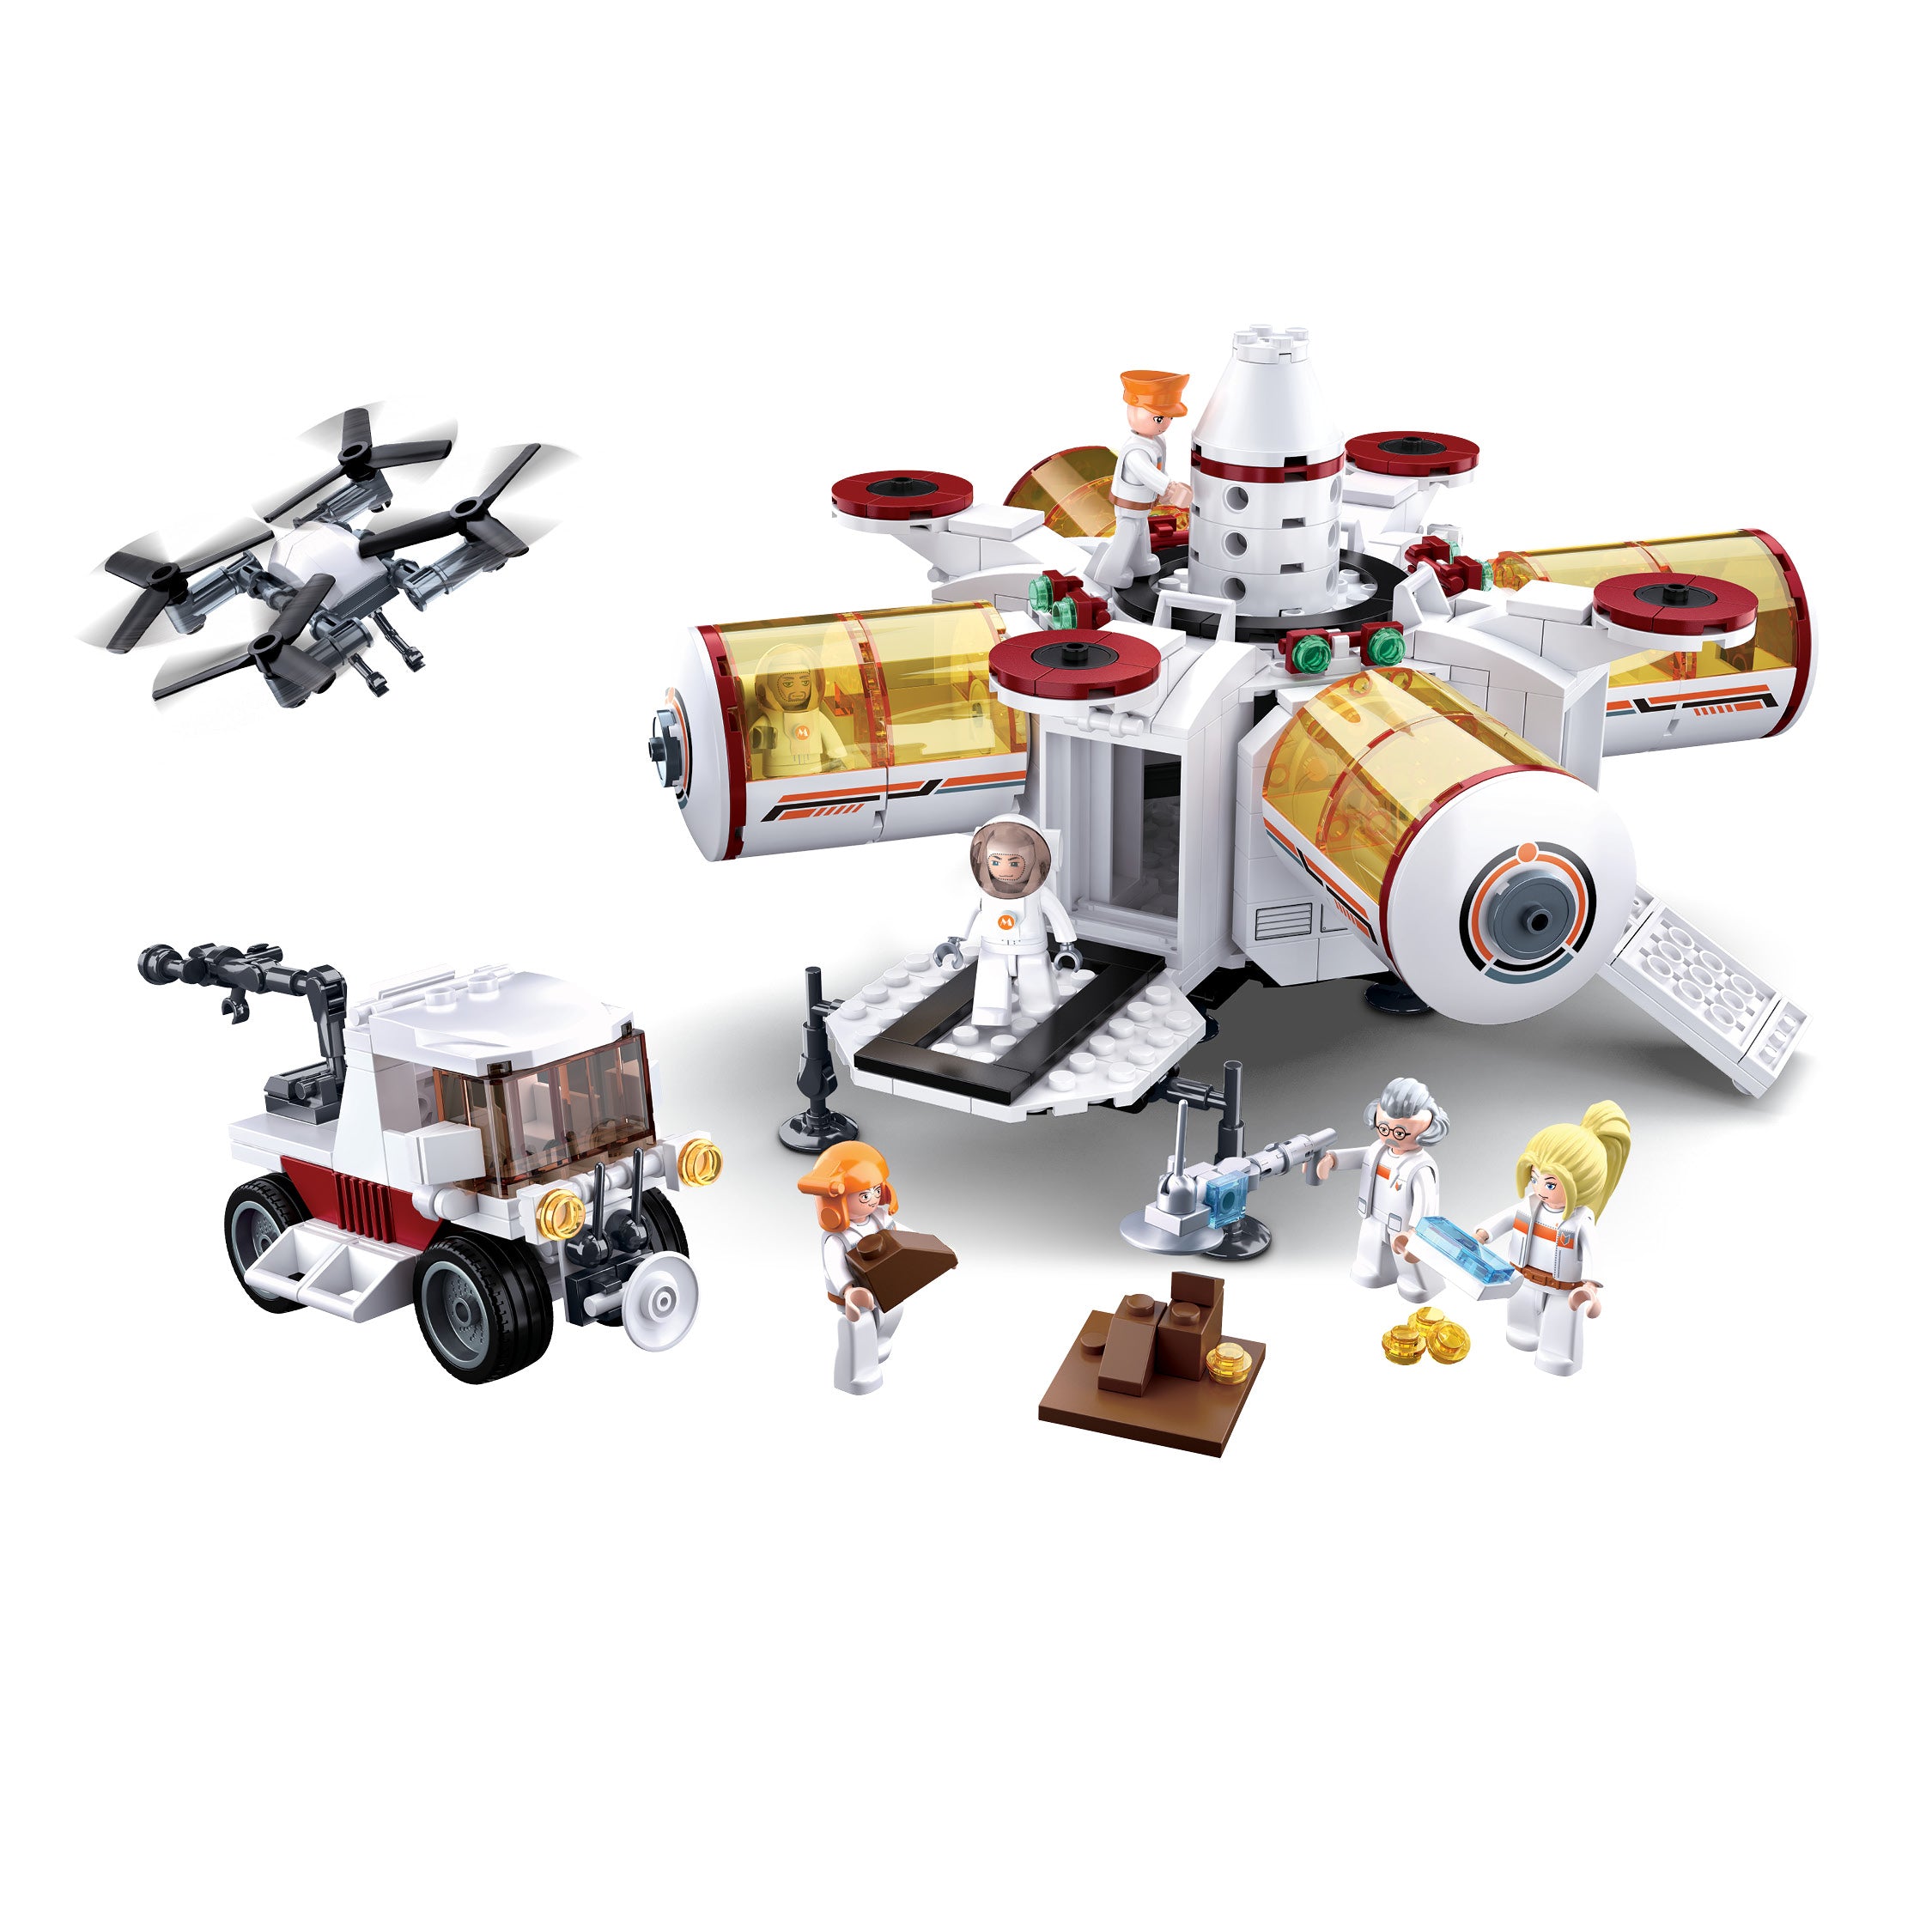 Sluban® Space-Space Base(642Pcs) M38-B0739 (642 Pcs) Building Blocks Kit For Boys And Girls Aged 8 Years And Above Creative Construction Set Educational Stem Toy, Blocks Compatible With Other Leading Brands, Bis Certified.